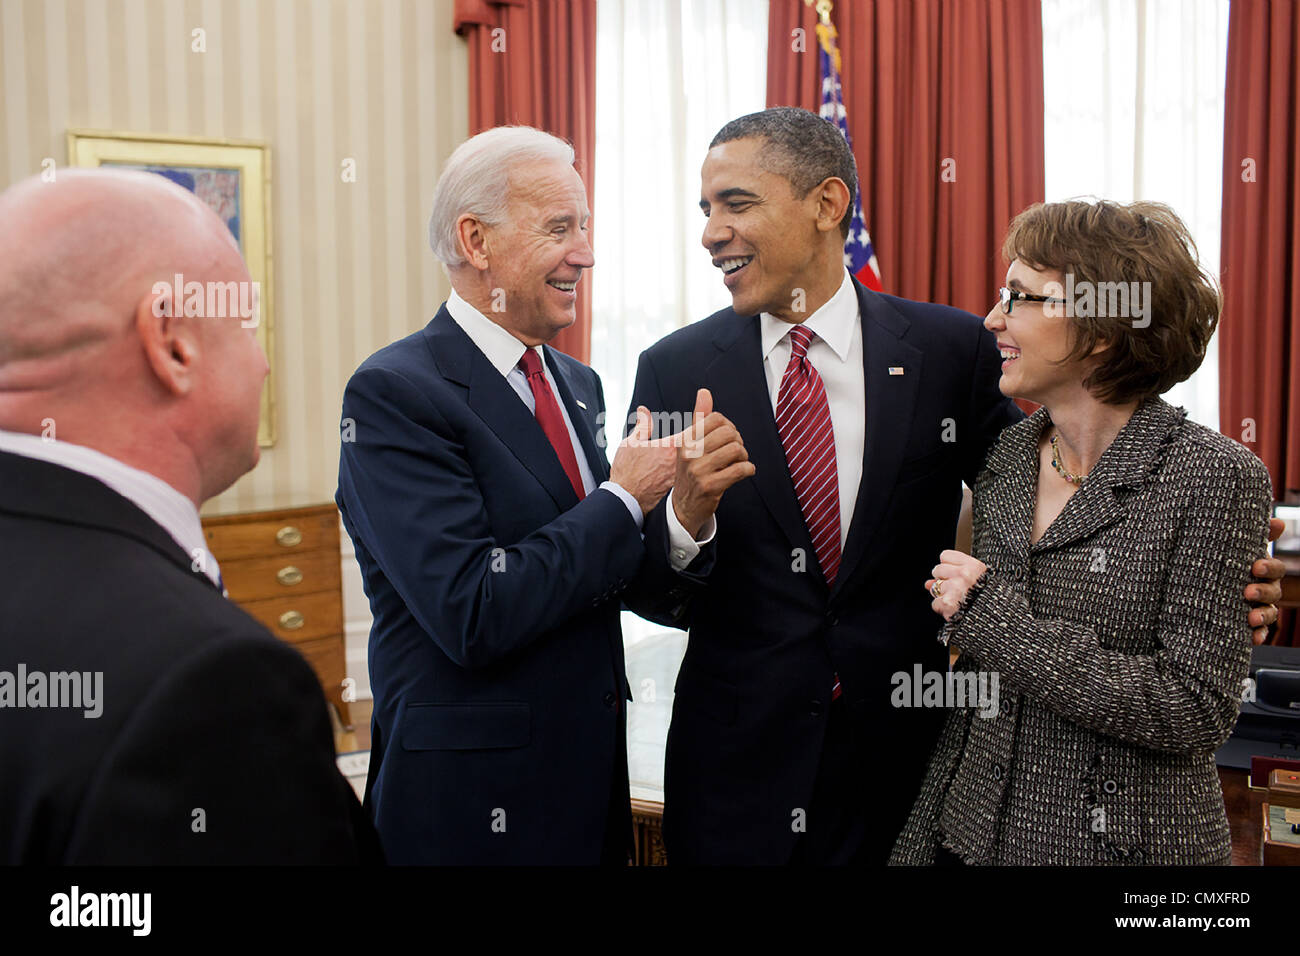 President Barack Obama and Vice President Joe Biden talk with former Representative Gabrielle Giffords and her husband Mark Kelly, after the President signed H.R. 3801, the Ultralight Aircraft Smuggling Prevention Act of 2012 in the Oval Office February 10, 2012 in Washington, DC. Stock Photo